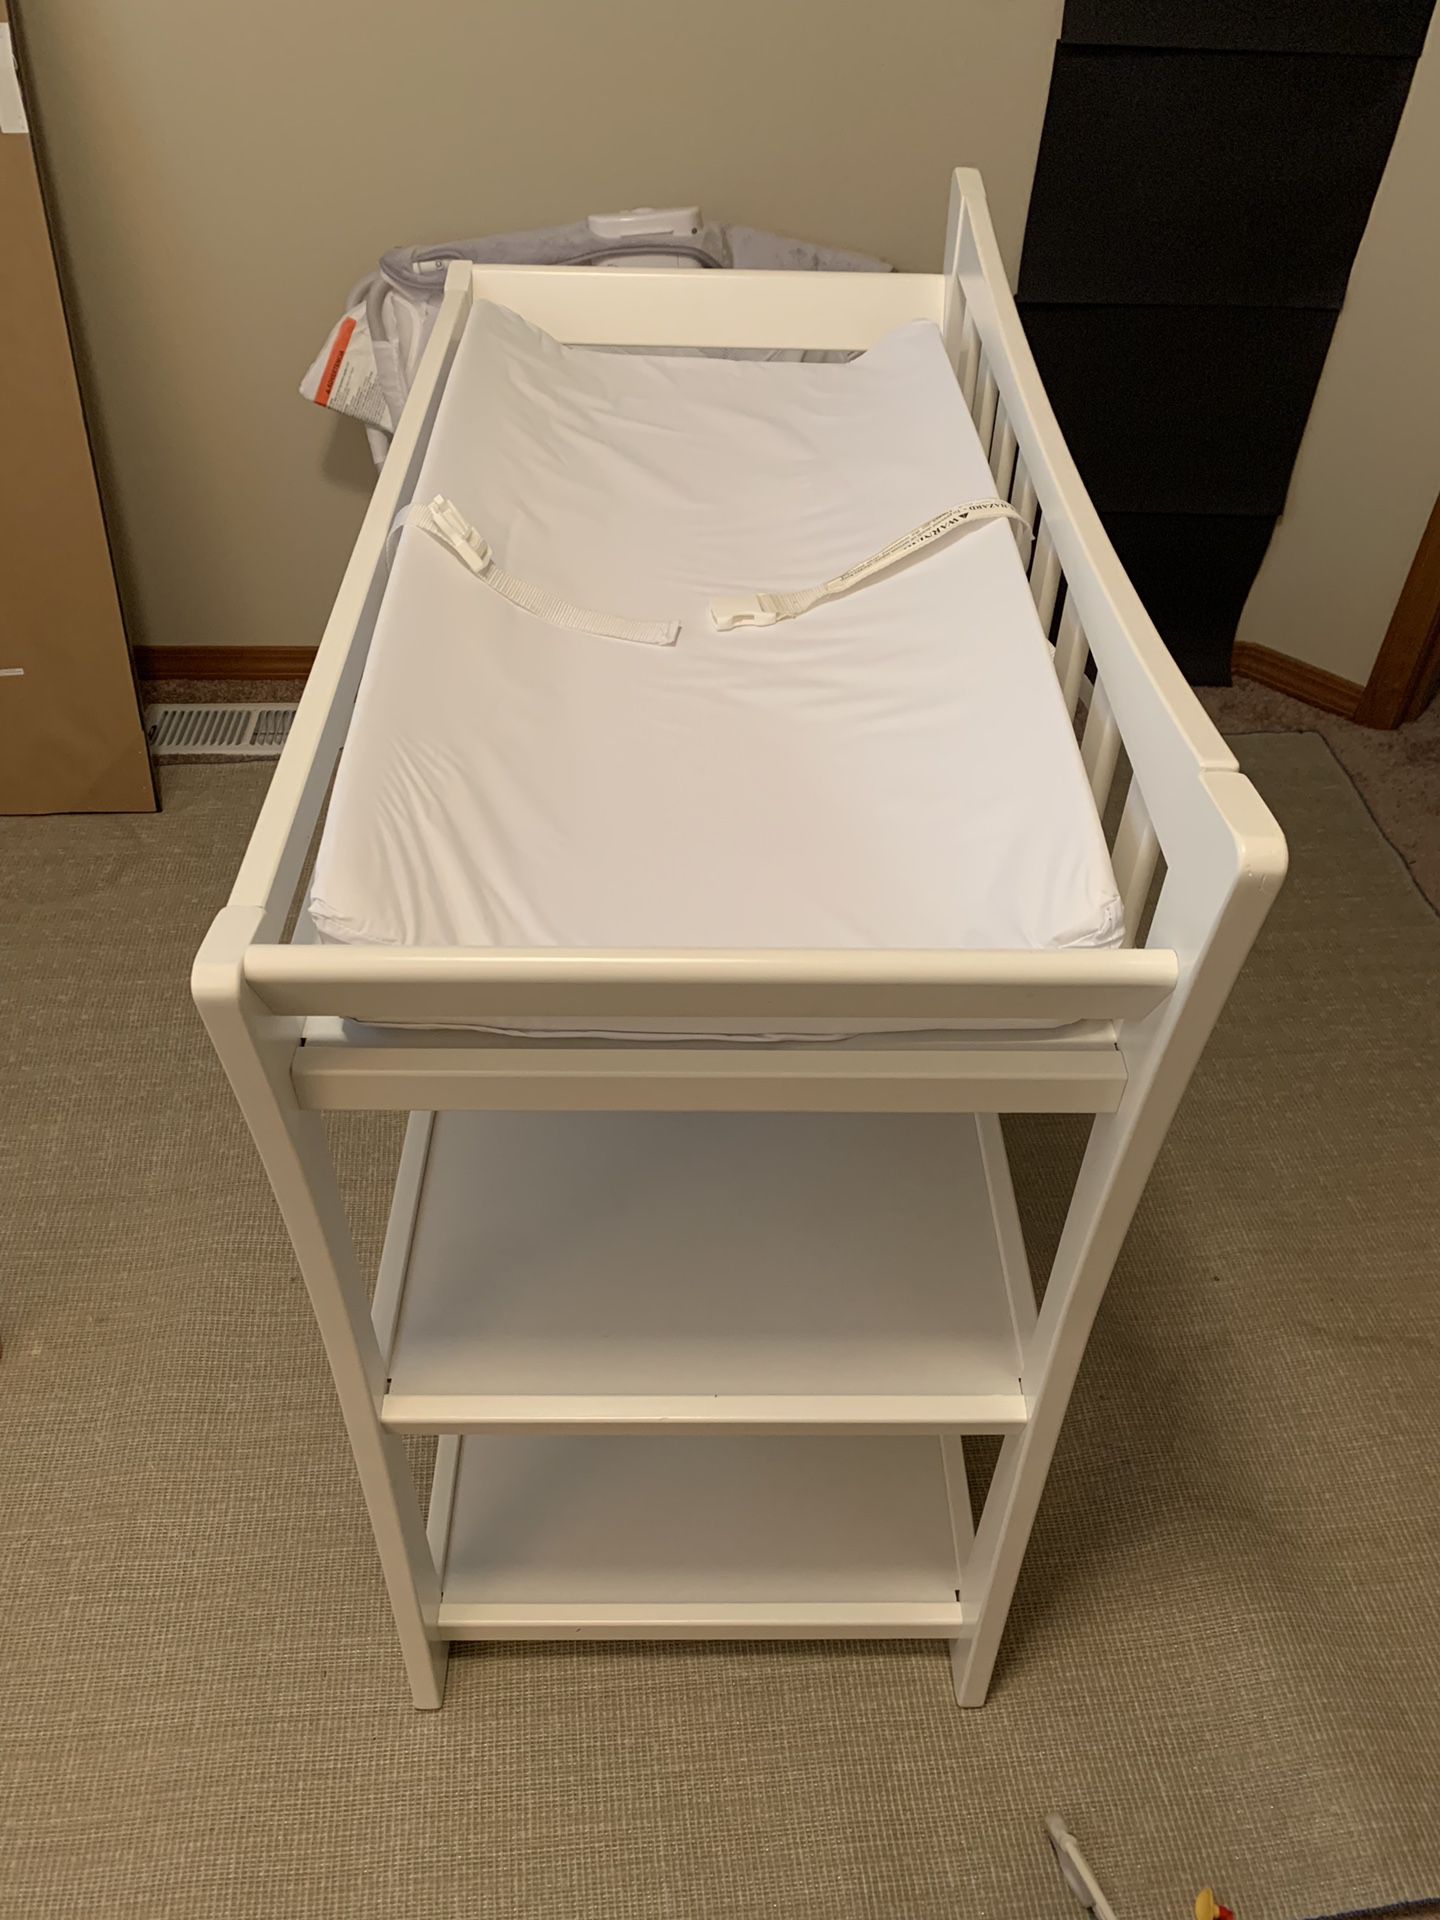 Child Craft Changing Table super clean, like new. OBO